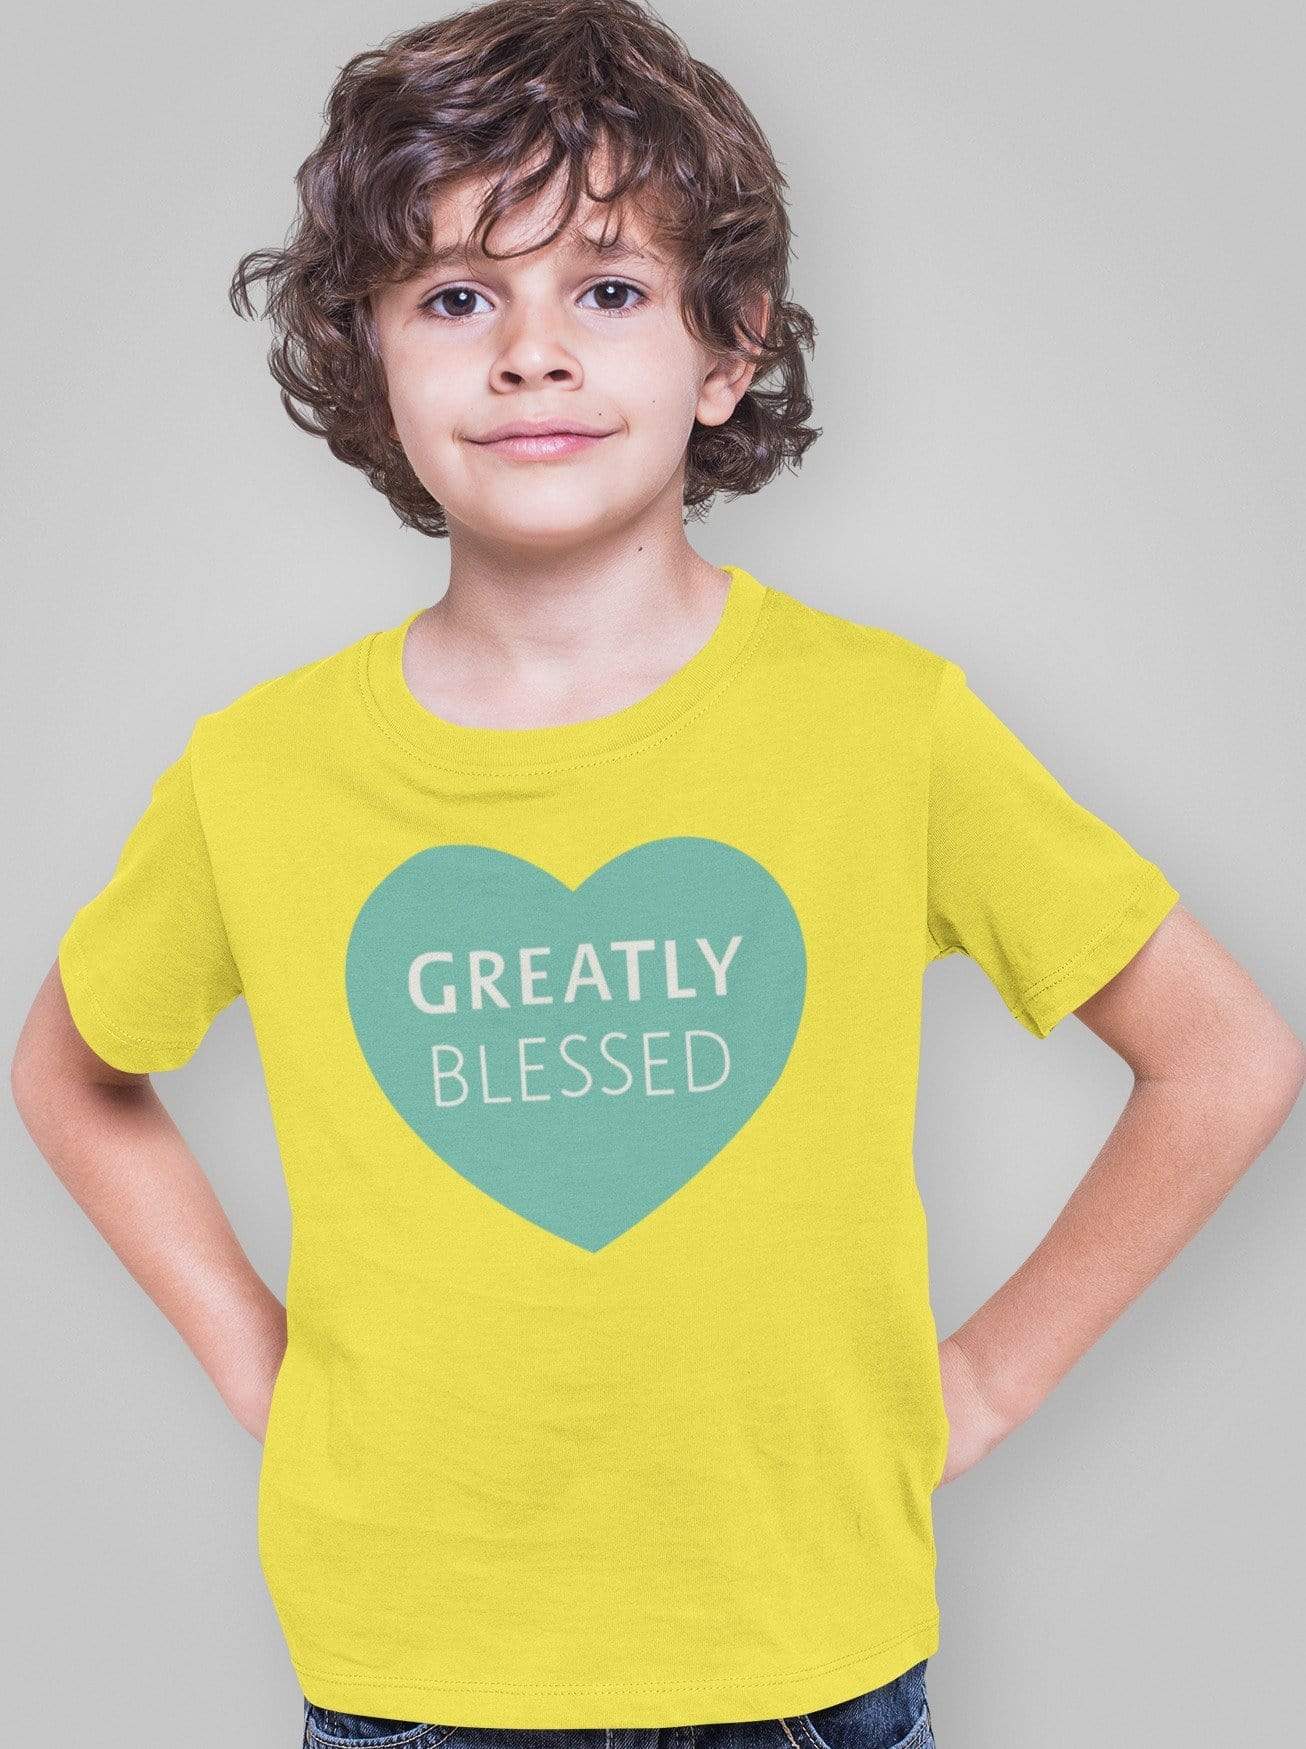 Living Words Boy Round neck Tshirt 0-11M / Yellow Greatly Blessed